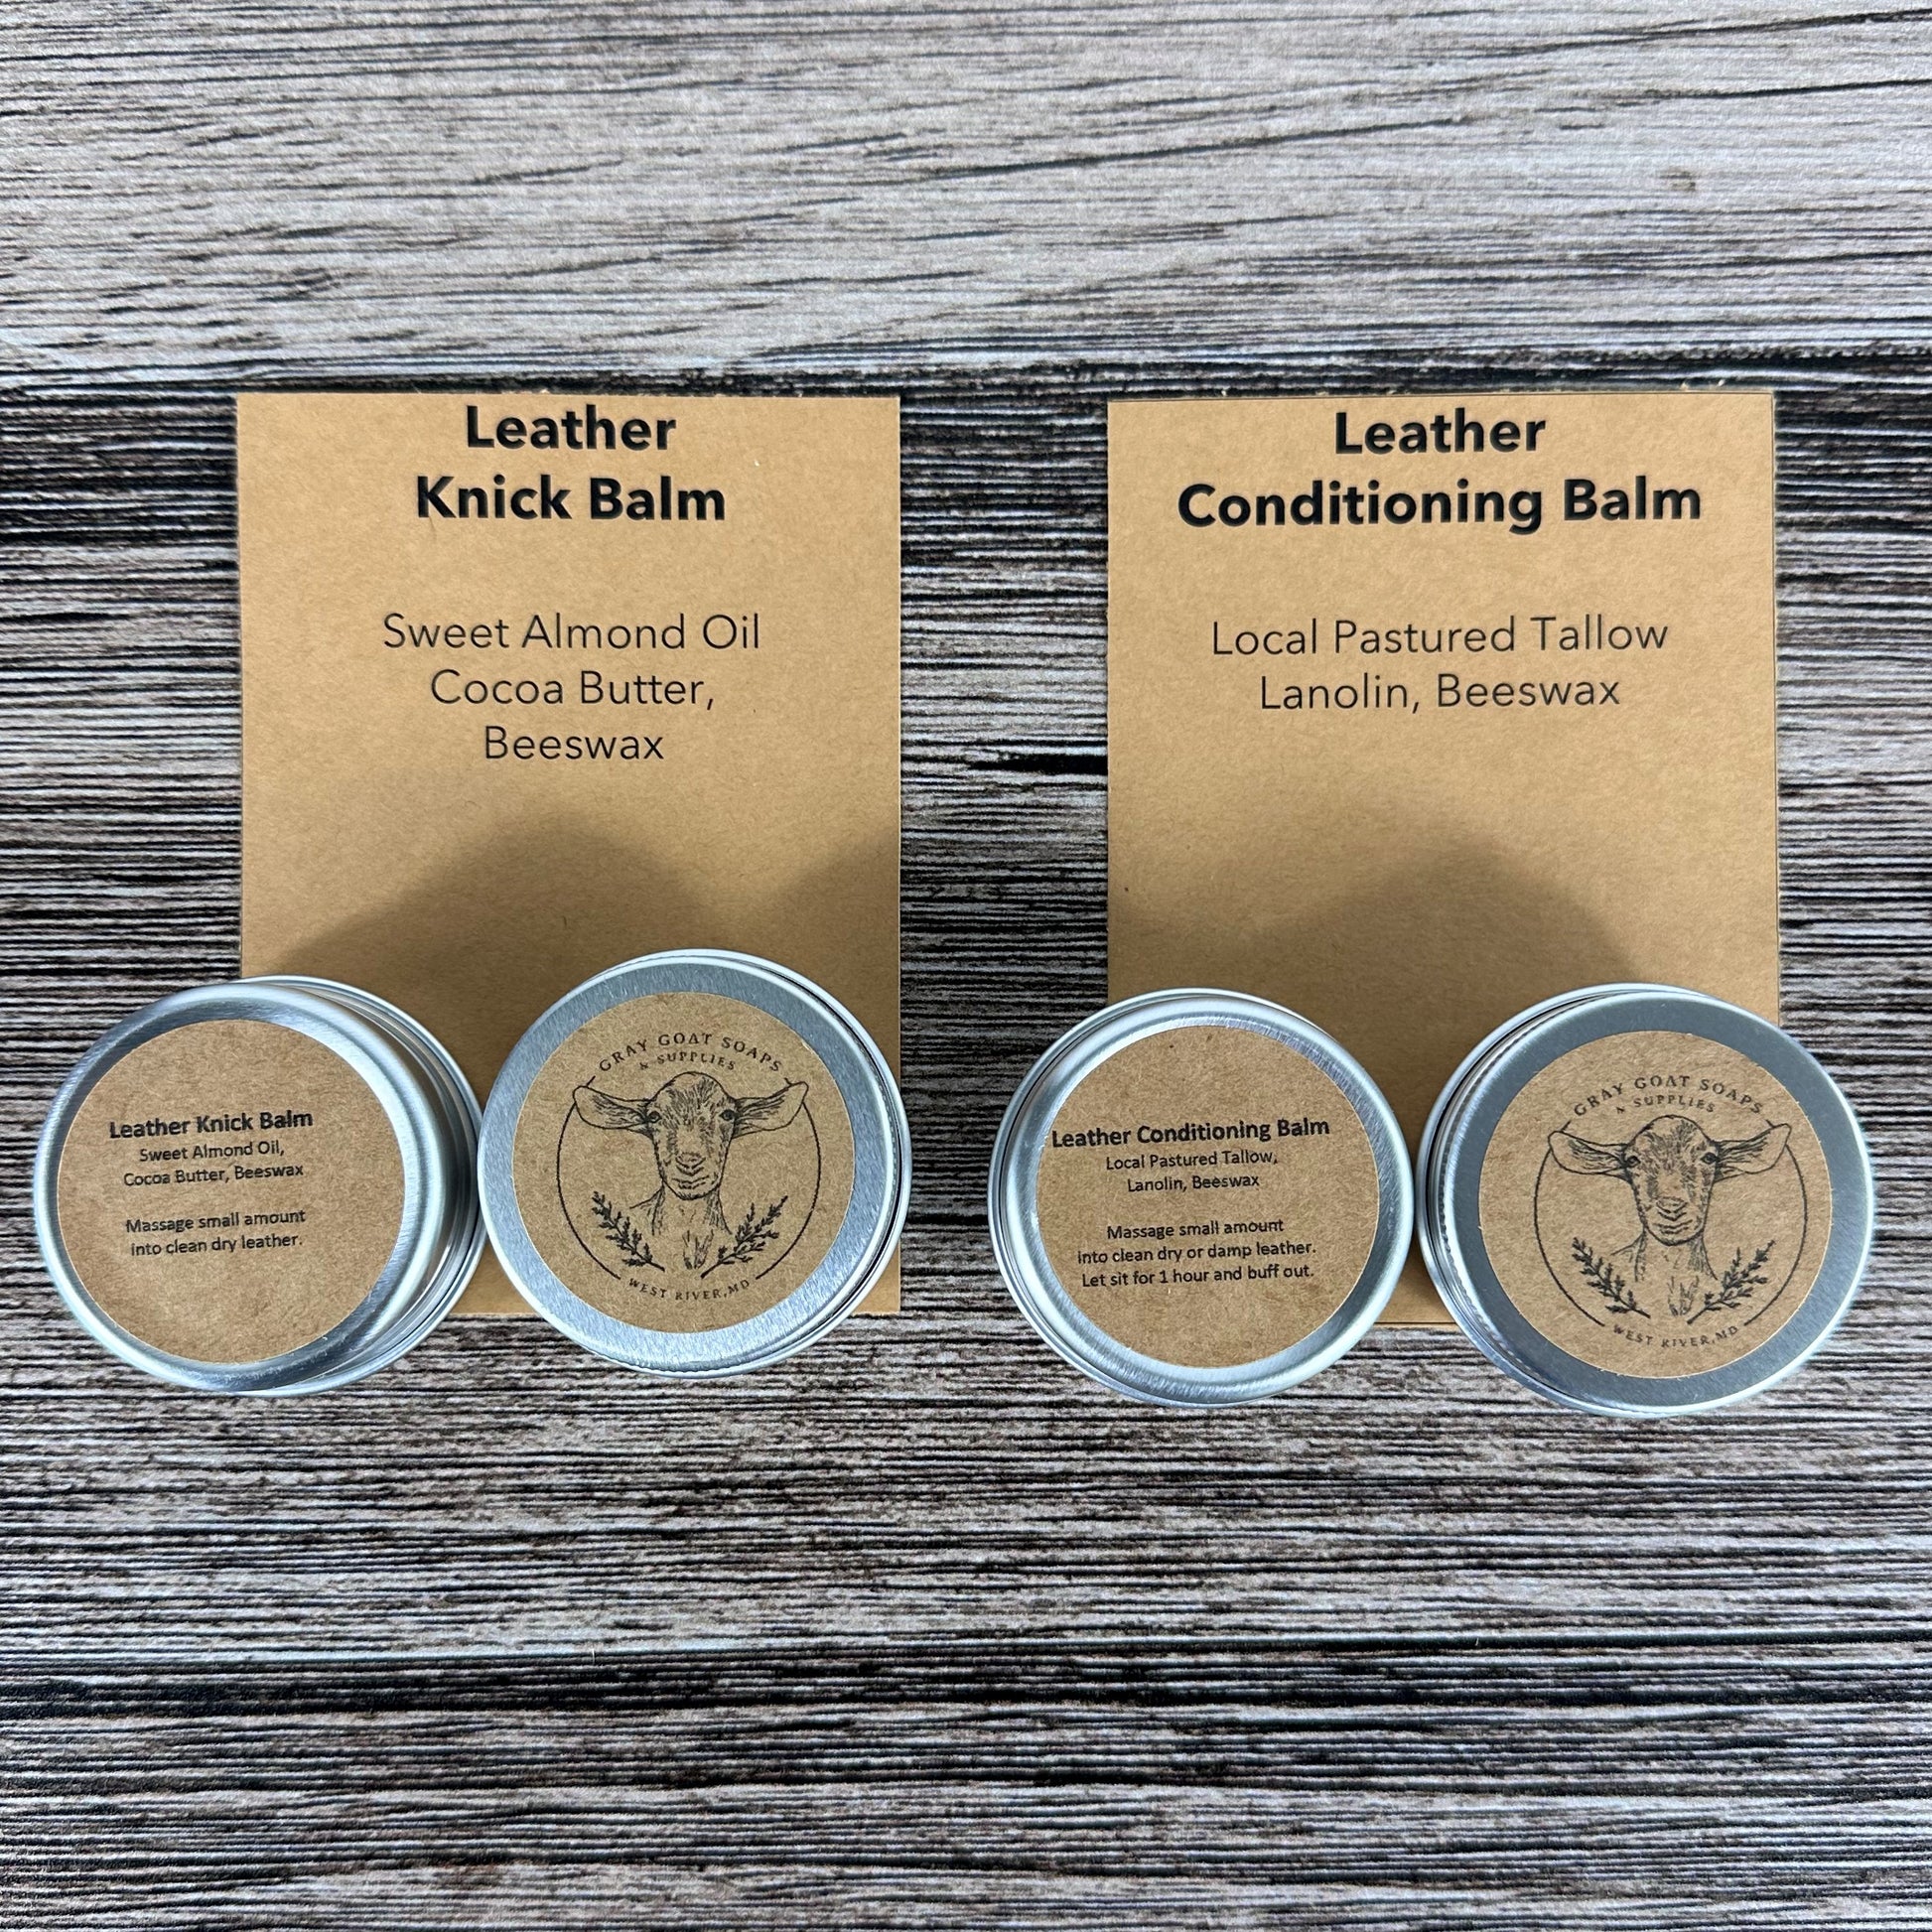 Conditional and Knick Balm squirescanvascreations.com